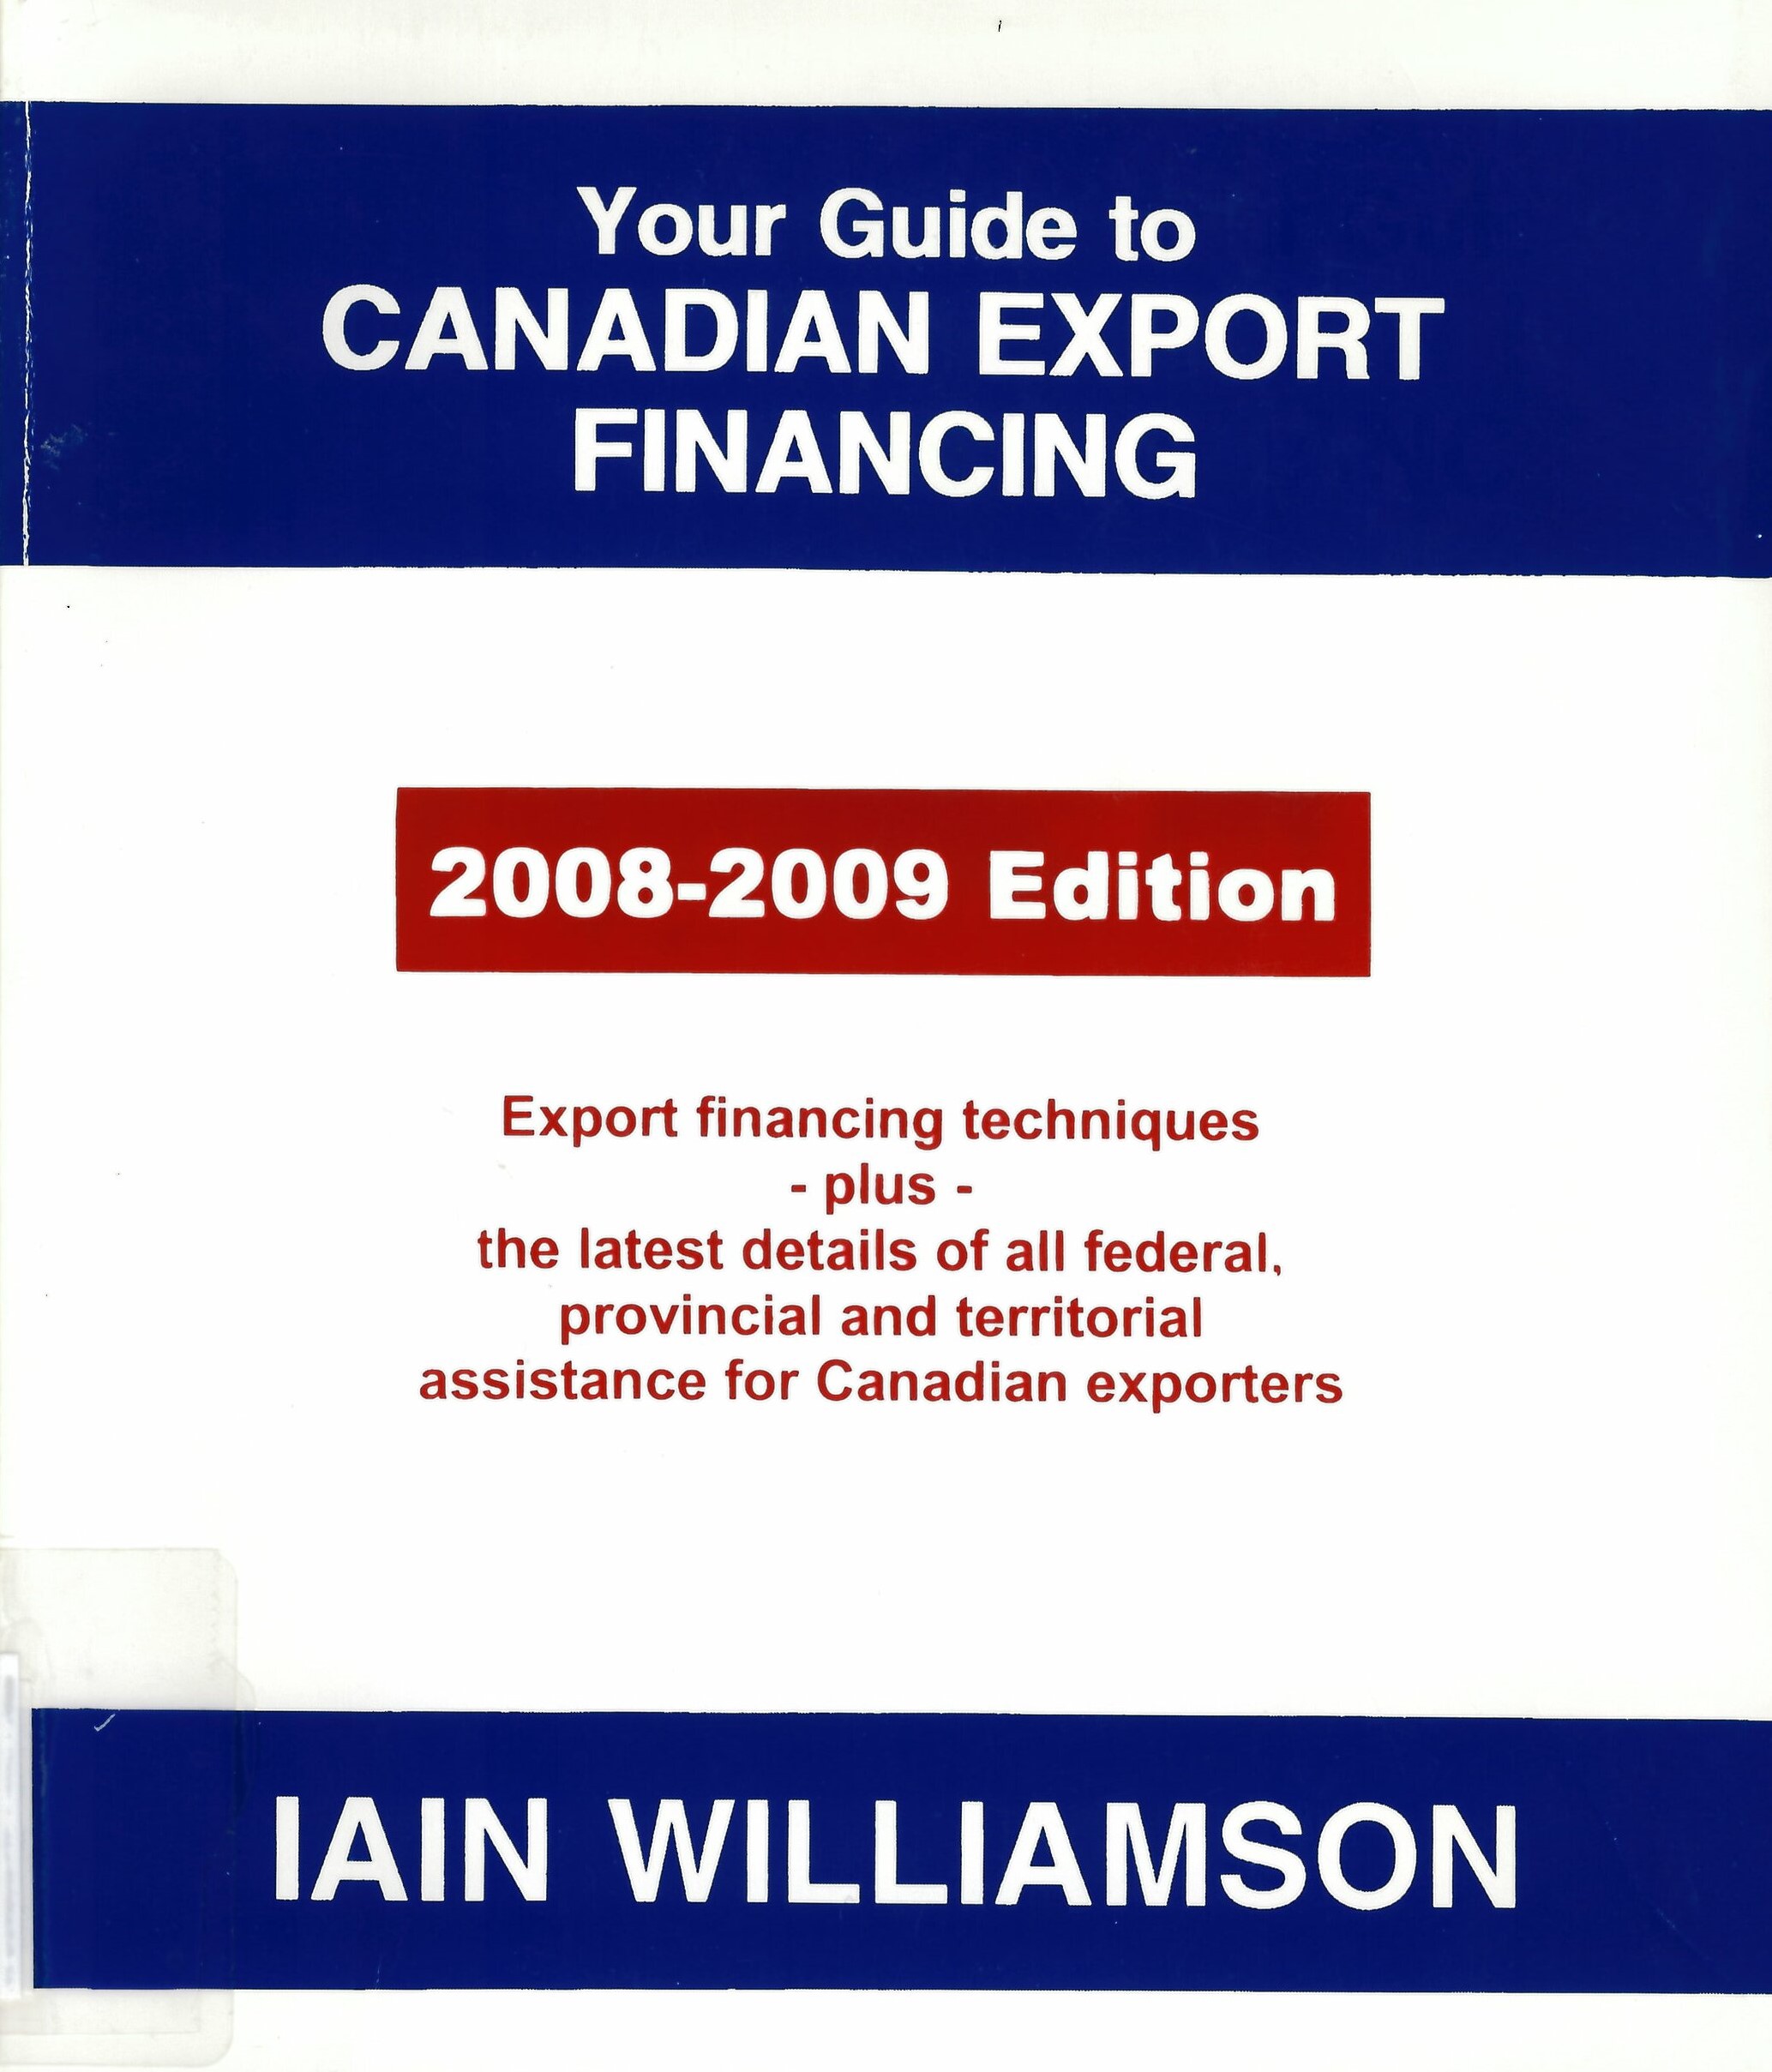 Your guide to Canadian export financing : export financing techniques plus the latest details of all federal, provincial and territorial assistance for Canadian exporters